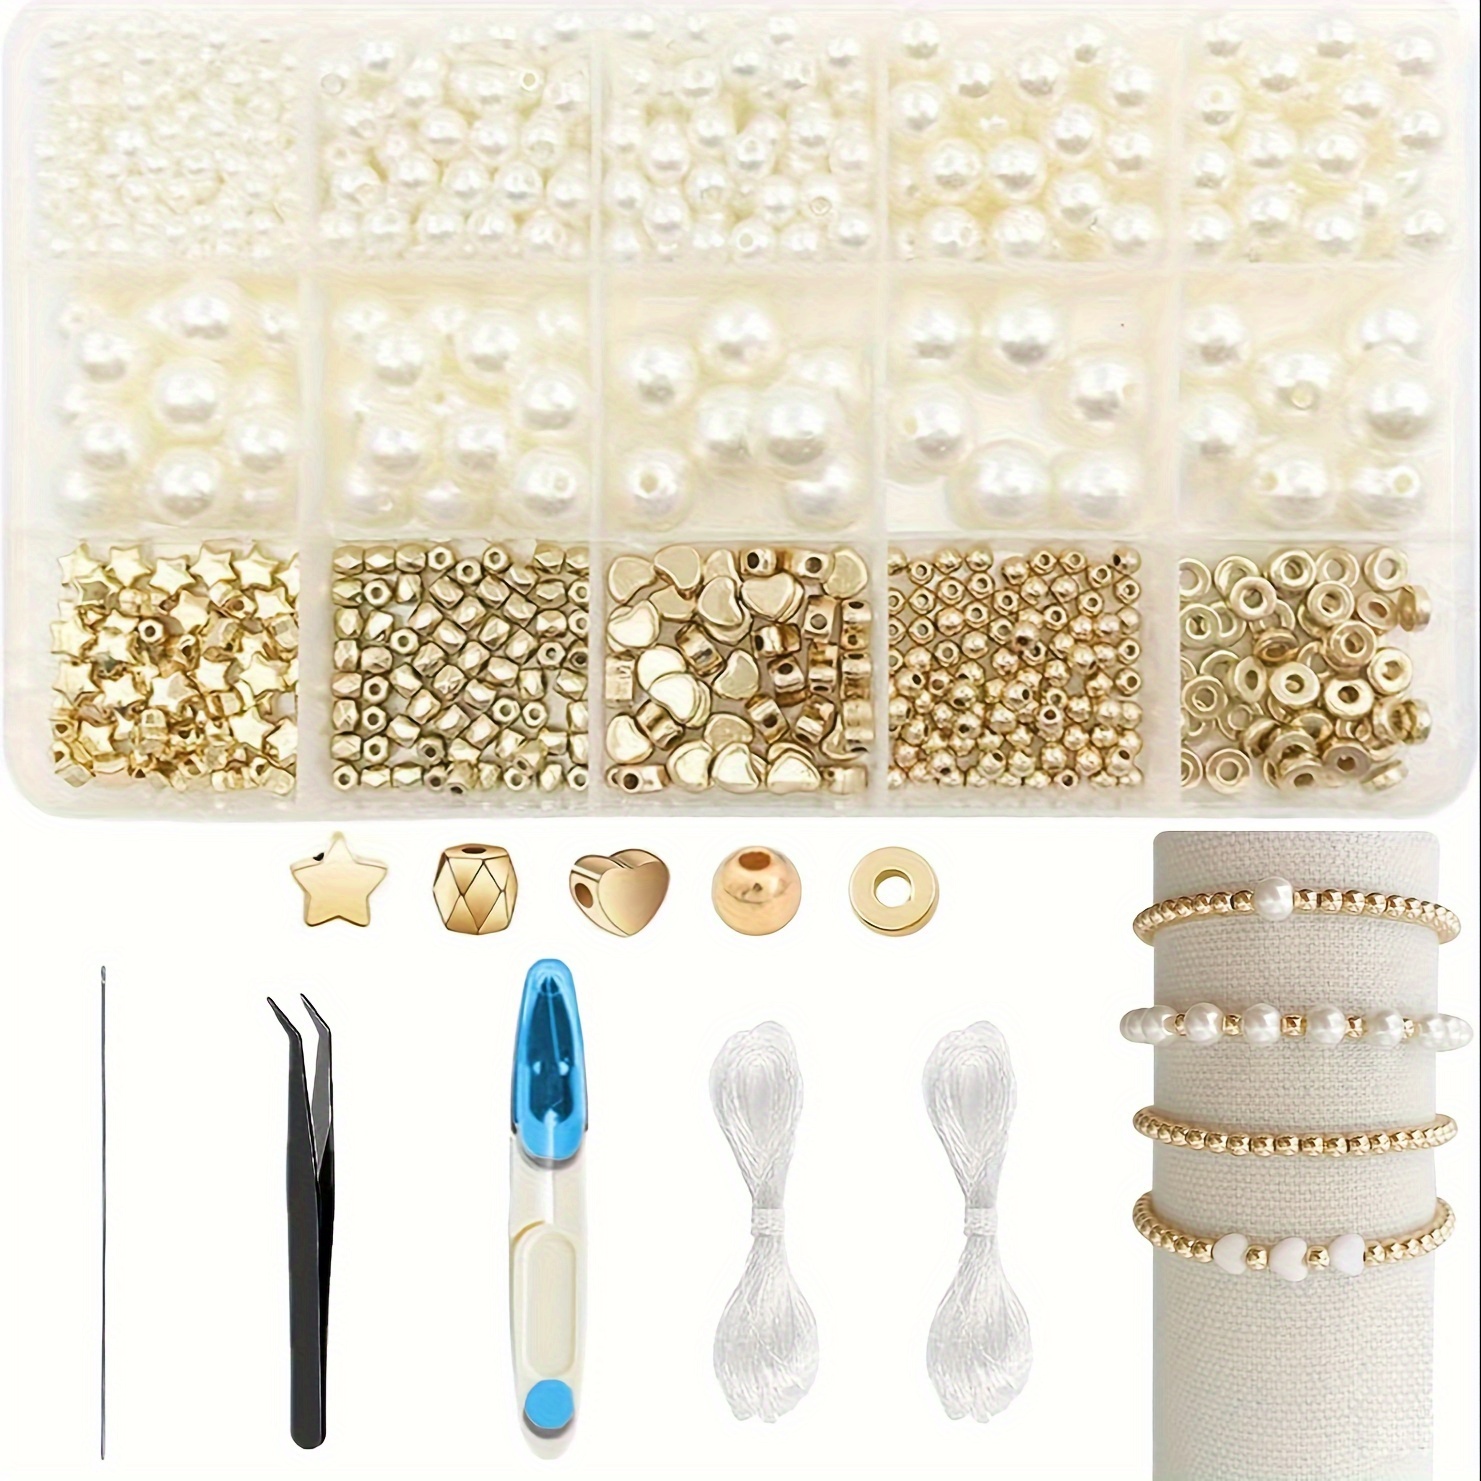 

720-piece Fashion Beading Kit With Pearls And Pentagonal Spacer Beads, Hollow Details, Diy Jewelry Making Set For Bracelets, Earrings, Necklaces - Crafting Supplies For Adults And Girls